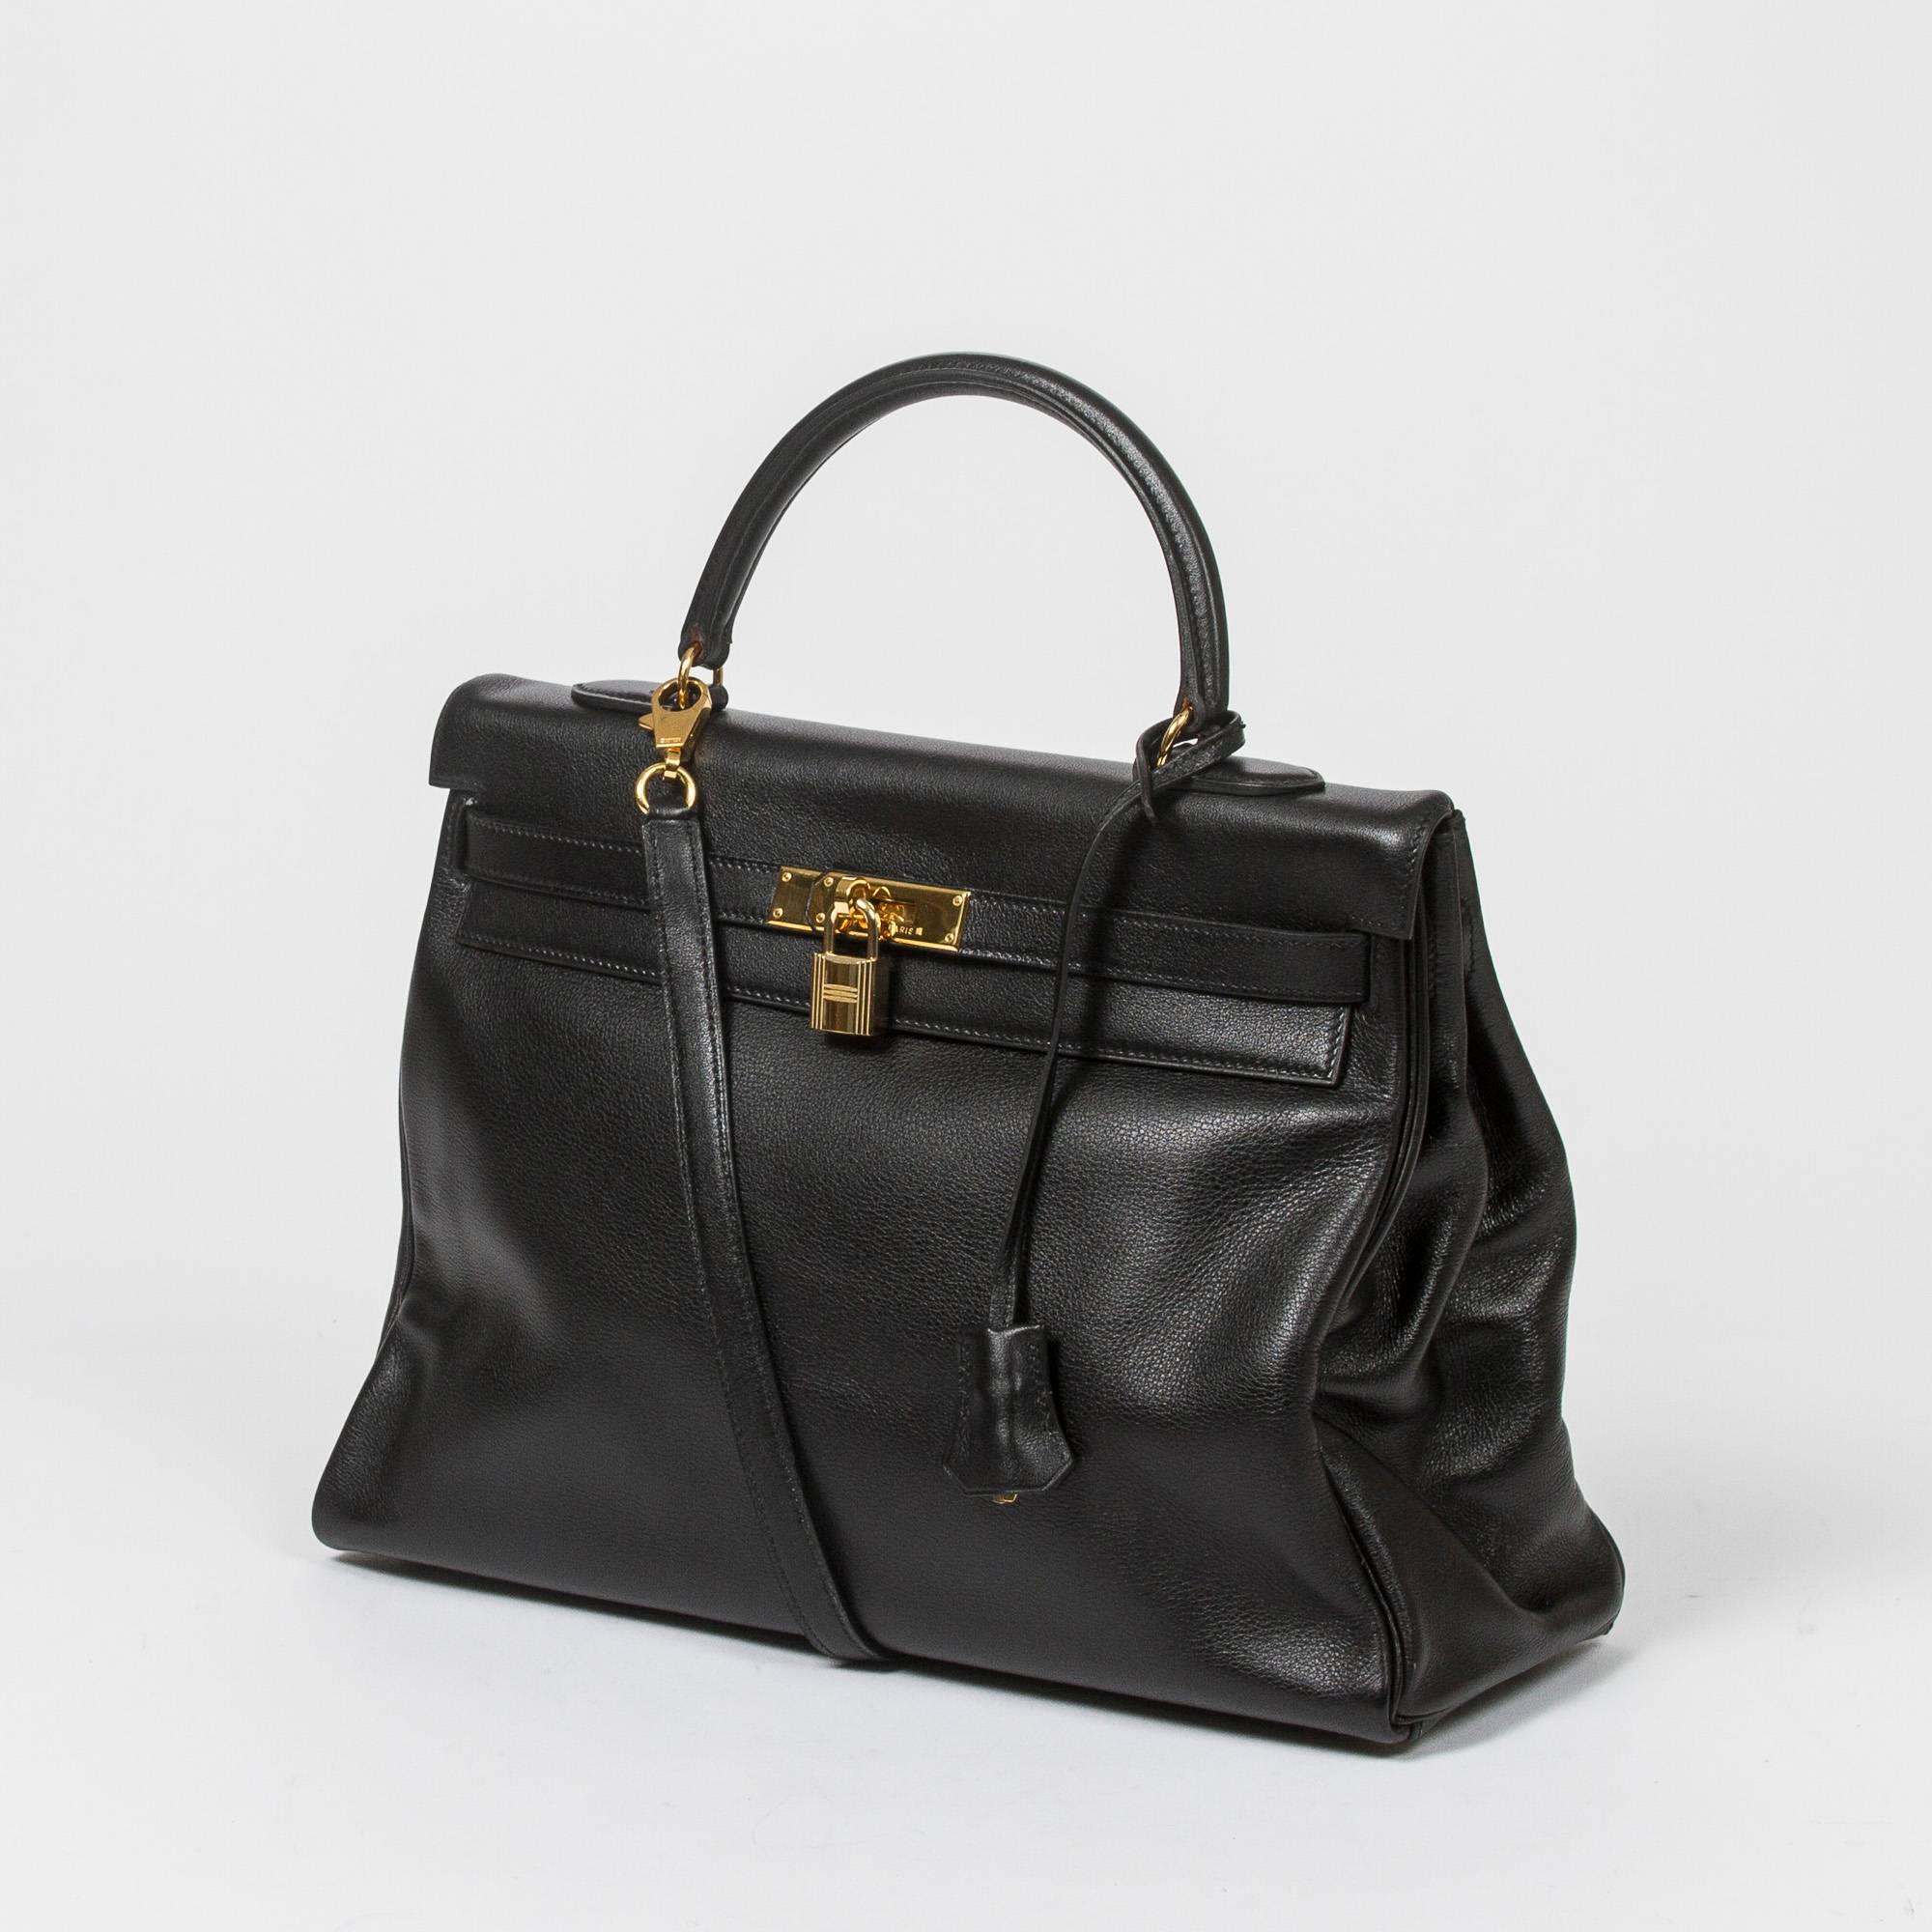 Kelly Retourne 35 in black Evergrain leather with optional strap, cadenas and keys in clochette, gold tone hardware. Interior lined in black chèvre leather with 2 slip pockets and one zip pocket. Stamp A in square. Model from 1997. Dustbag included.